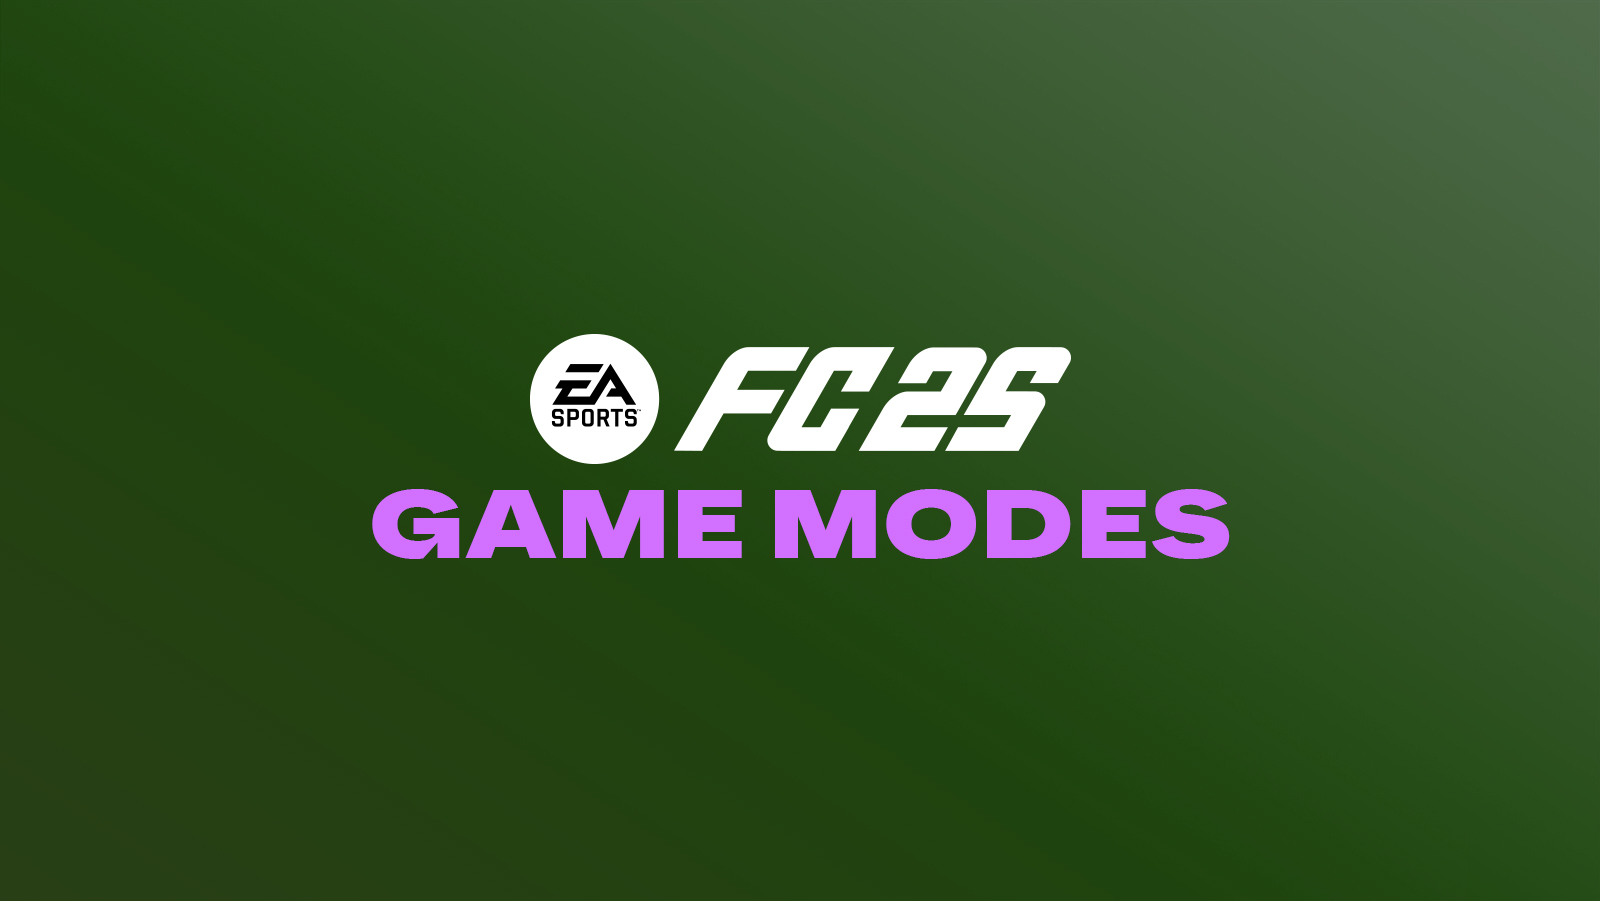 FC 25 Game Modes